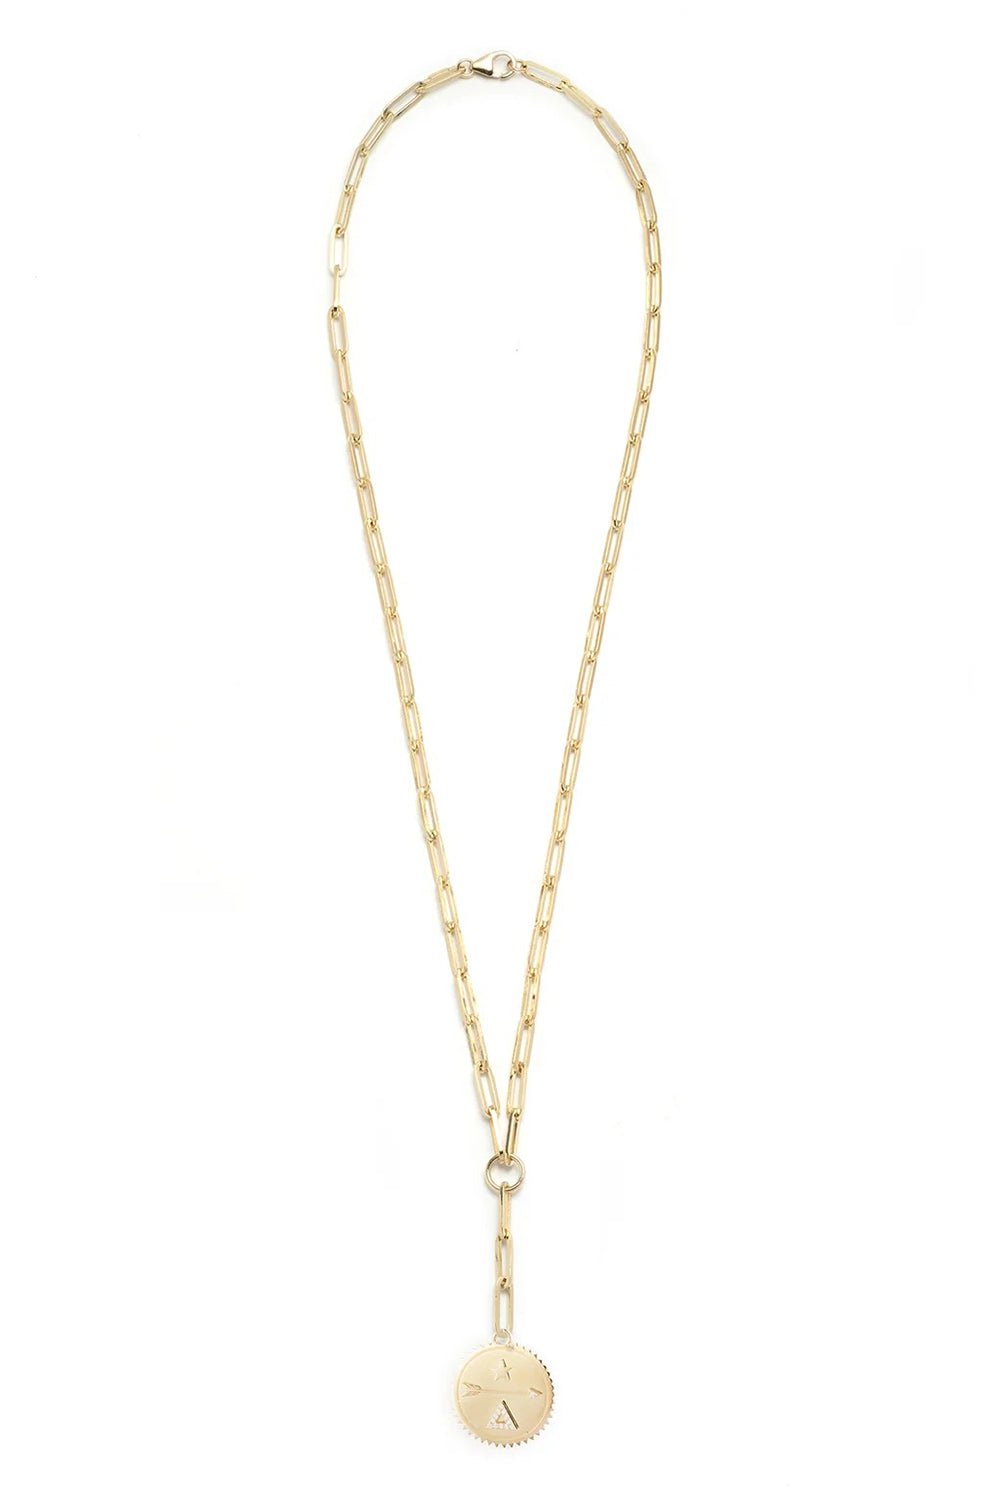 FOUNDRAE-Classic Fob Dream Necklace-YELLOW GOLD